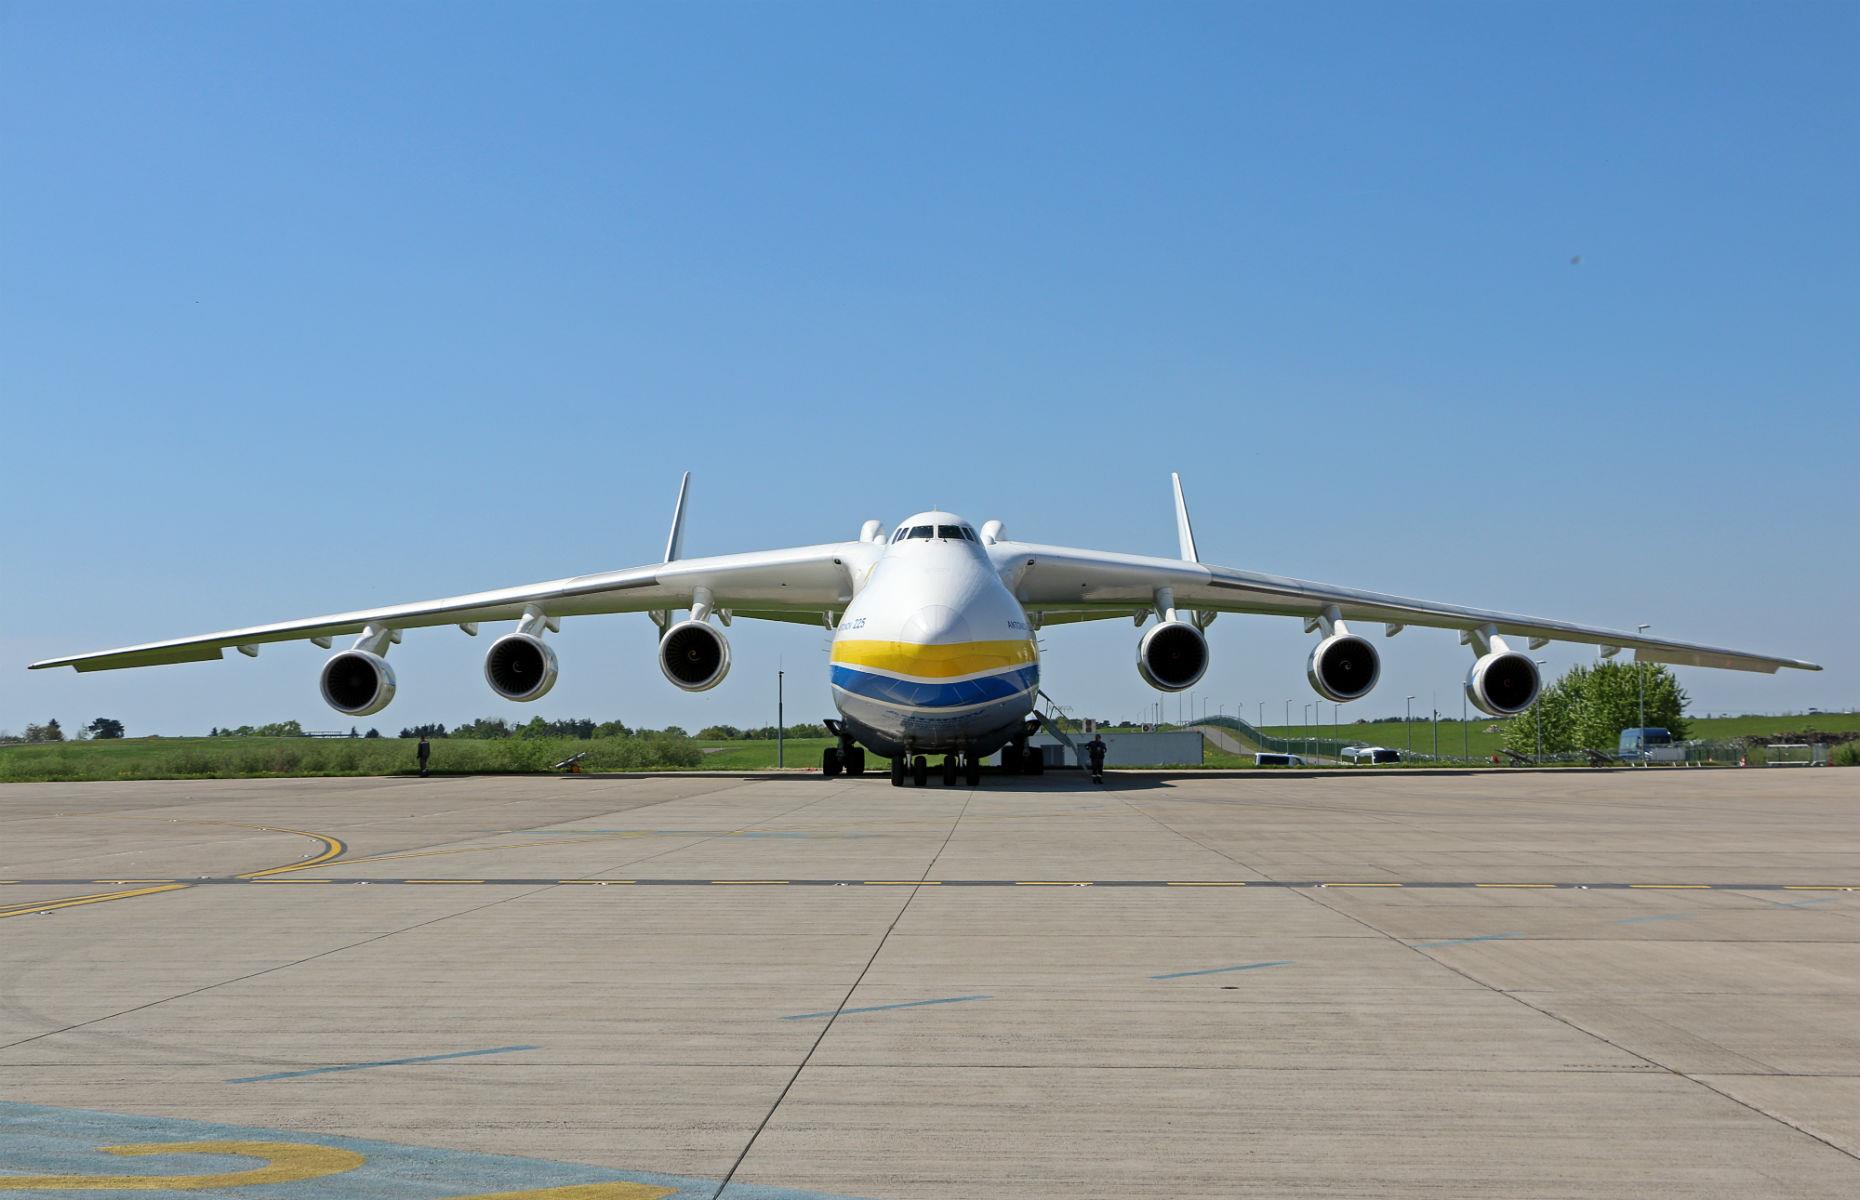 <p>Only one of the enormous planes was ever completed, and a second AN-225 spent years in production but was eventually abandoned, its unfinished shell still sitting in a hangar outside Kiev. ‘Mriya’ means ‘dream’ in Ukrainian, and the one-of-a-kind plane became a Ukrainian icon as it shipped vast payloads across the continent and transported medical supplies during the pandemic. Tragically, the plane was destroyed during the Battle of Antonov Airport during the 2022 Russian Invasion of Ukraine.</p>